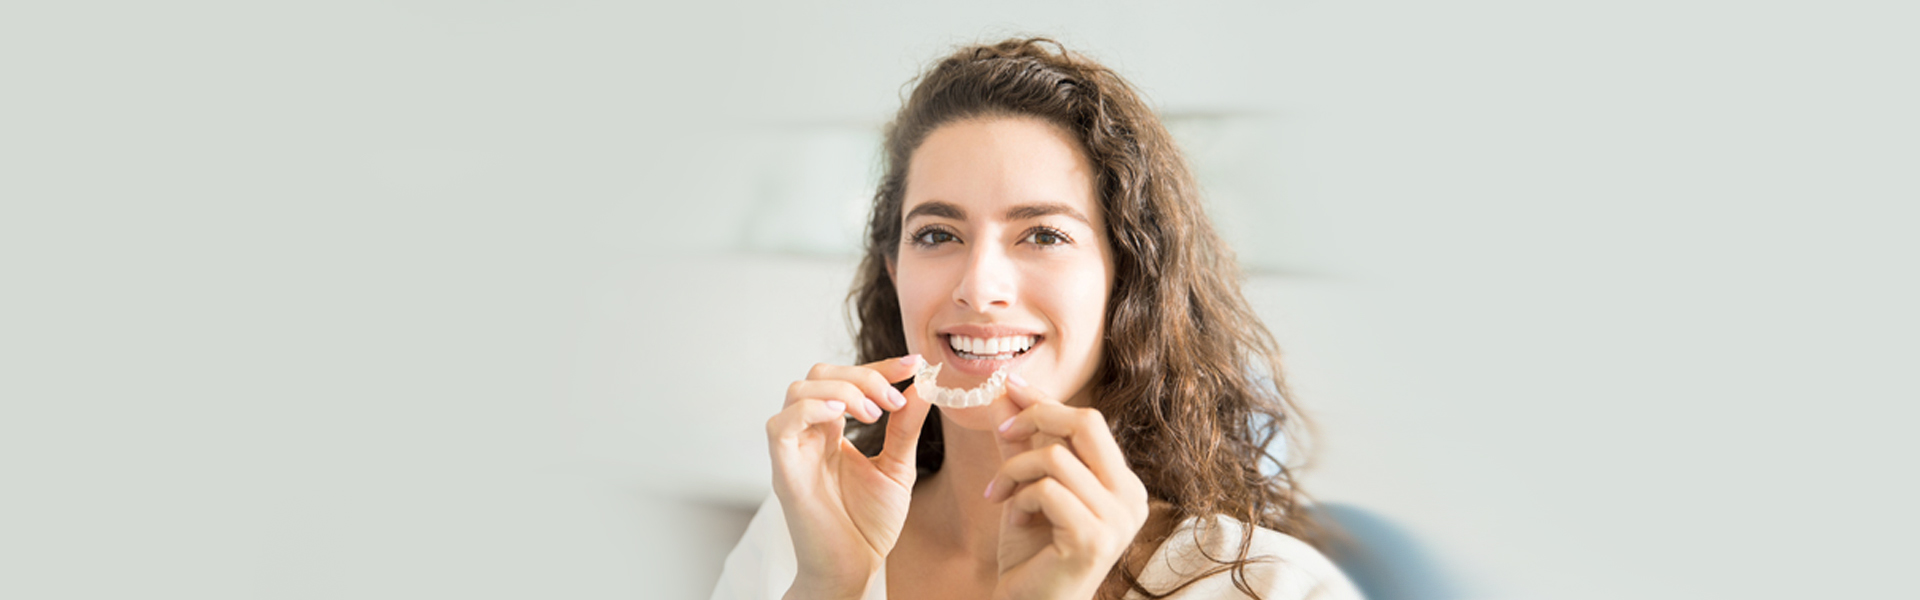 Clear Aligners and Oral Hygiene: What Are The Tips For Proper Care?